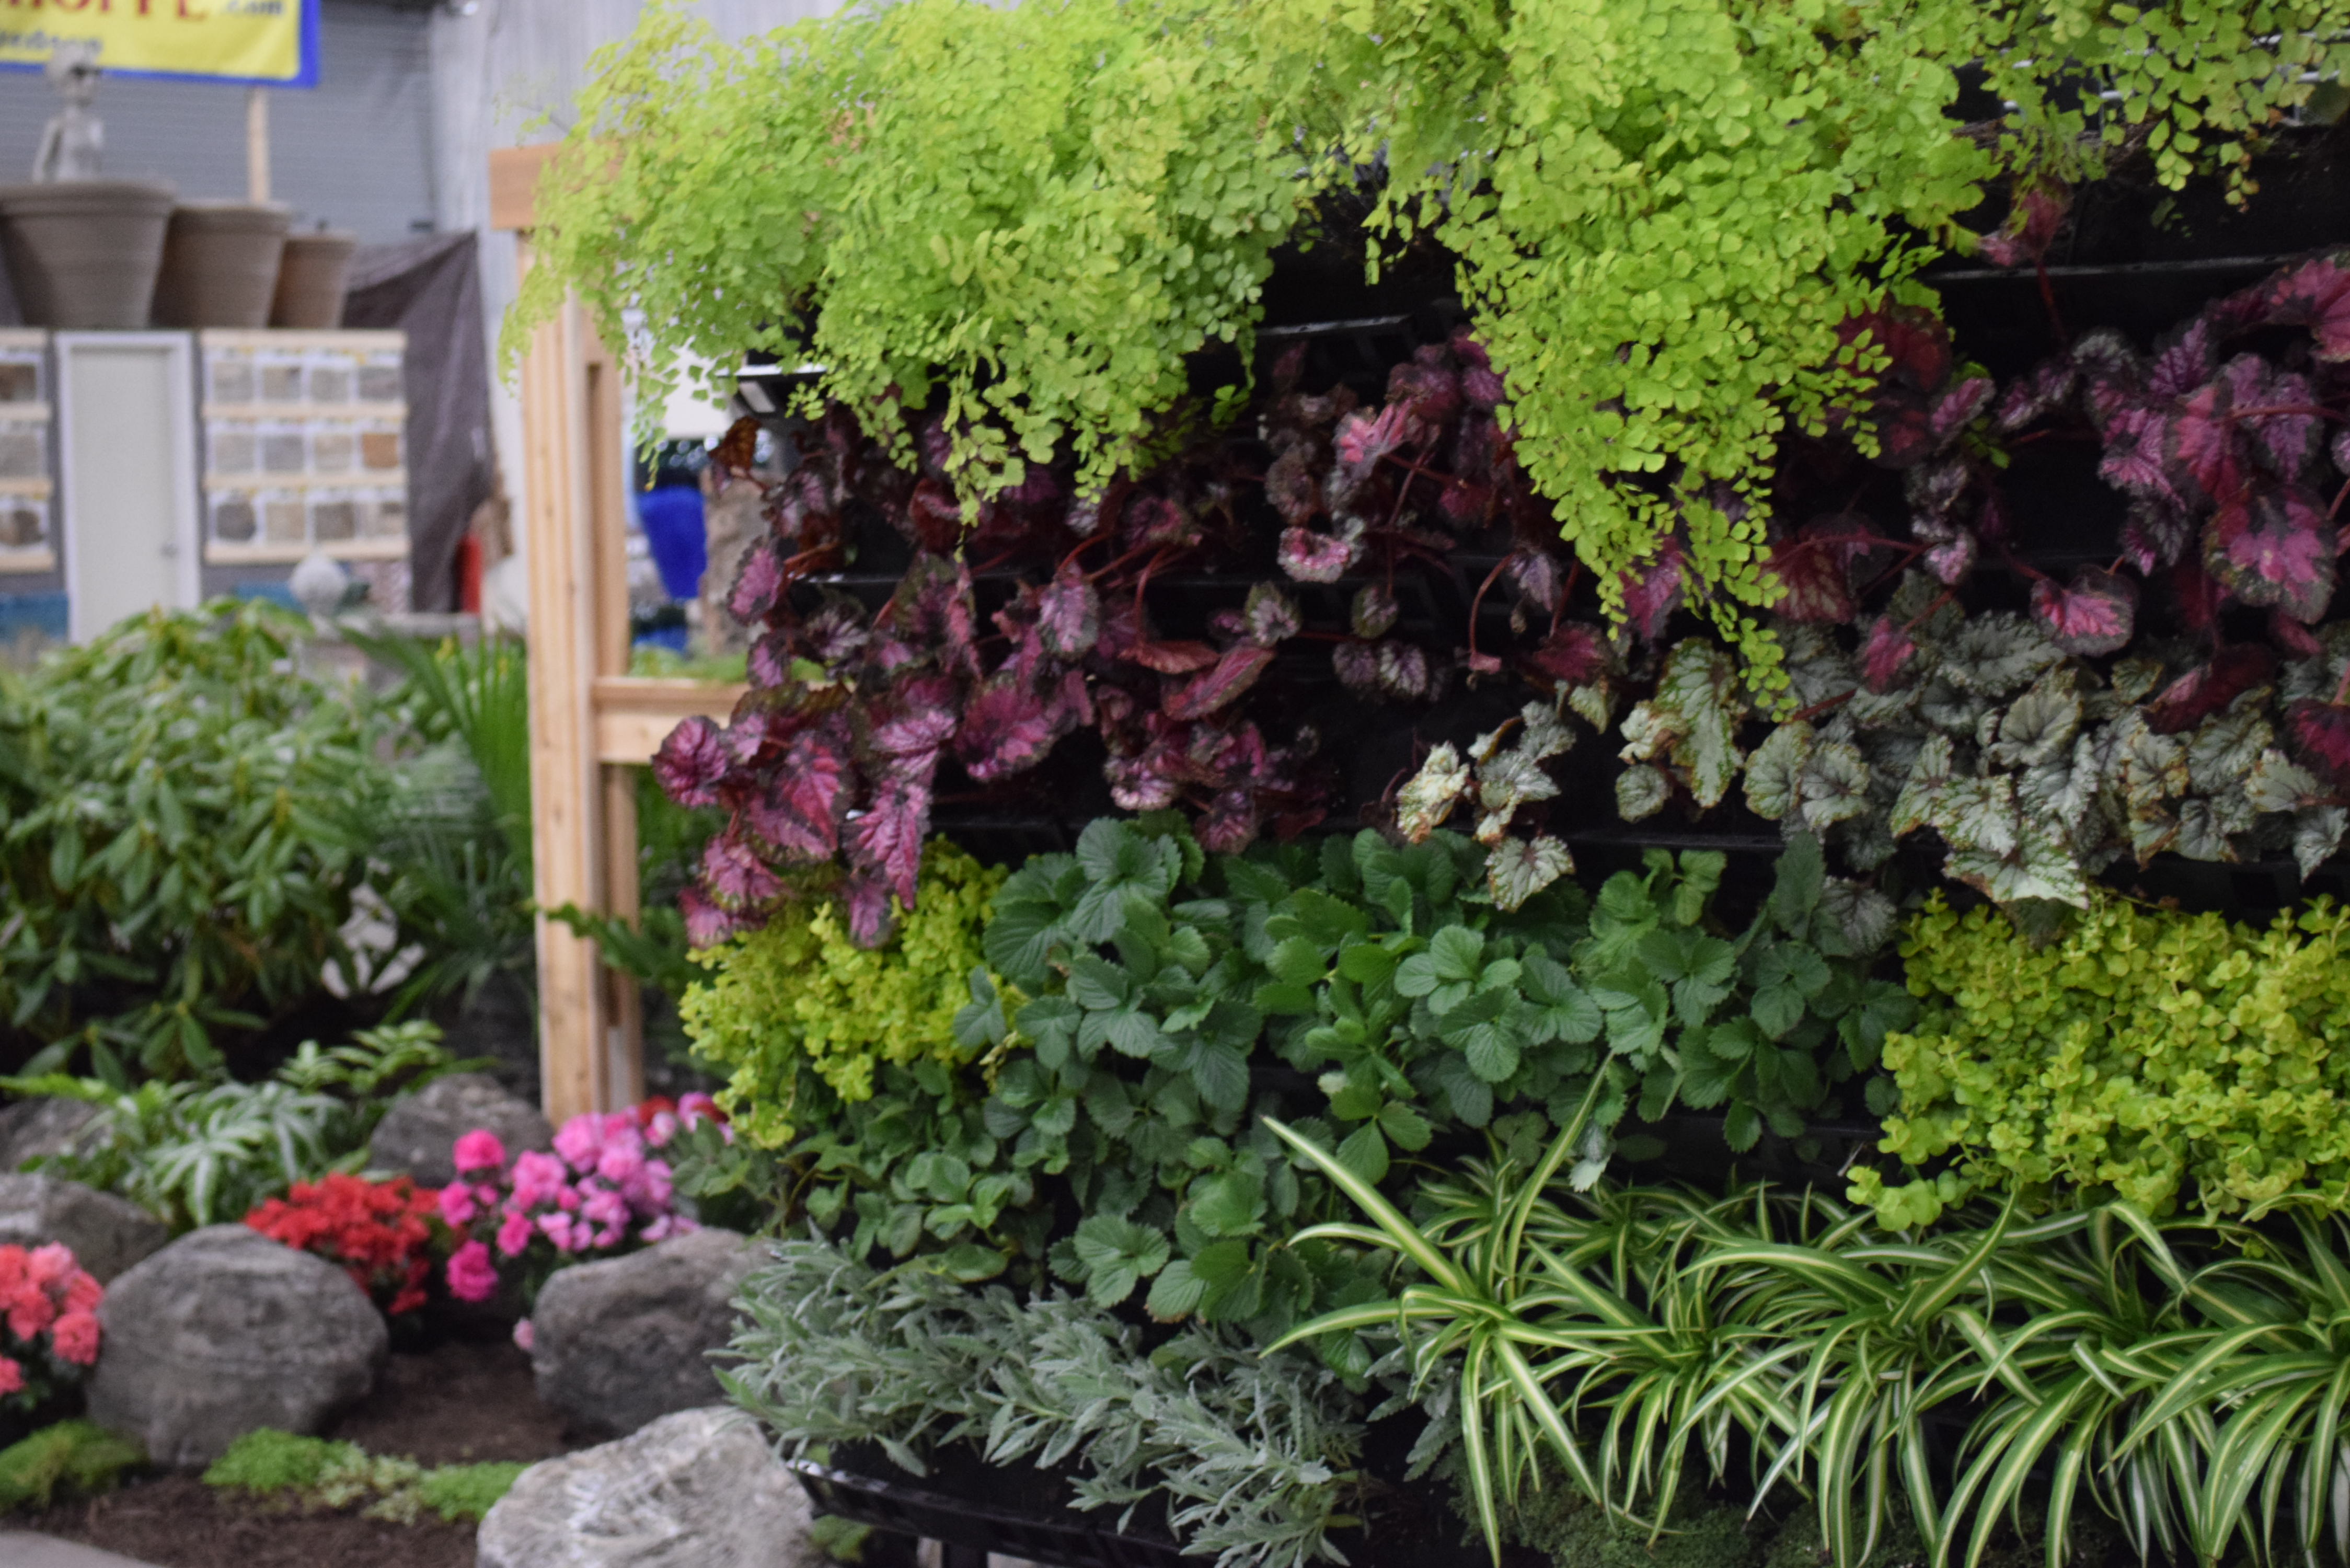 The Novi Home Garden Shows Personal Gardening Gets A Boost At